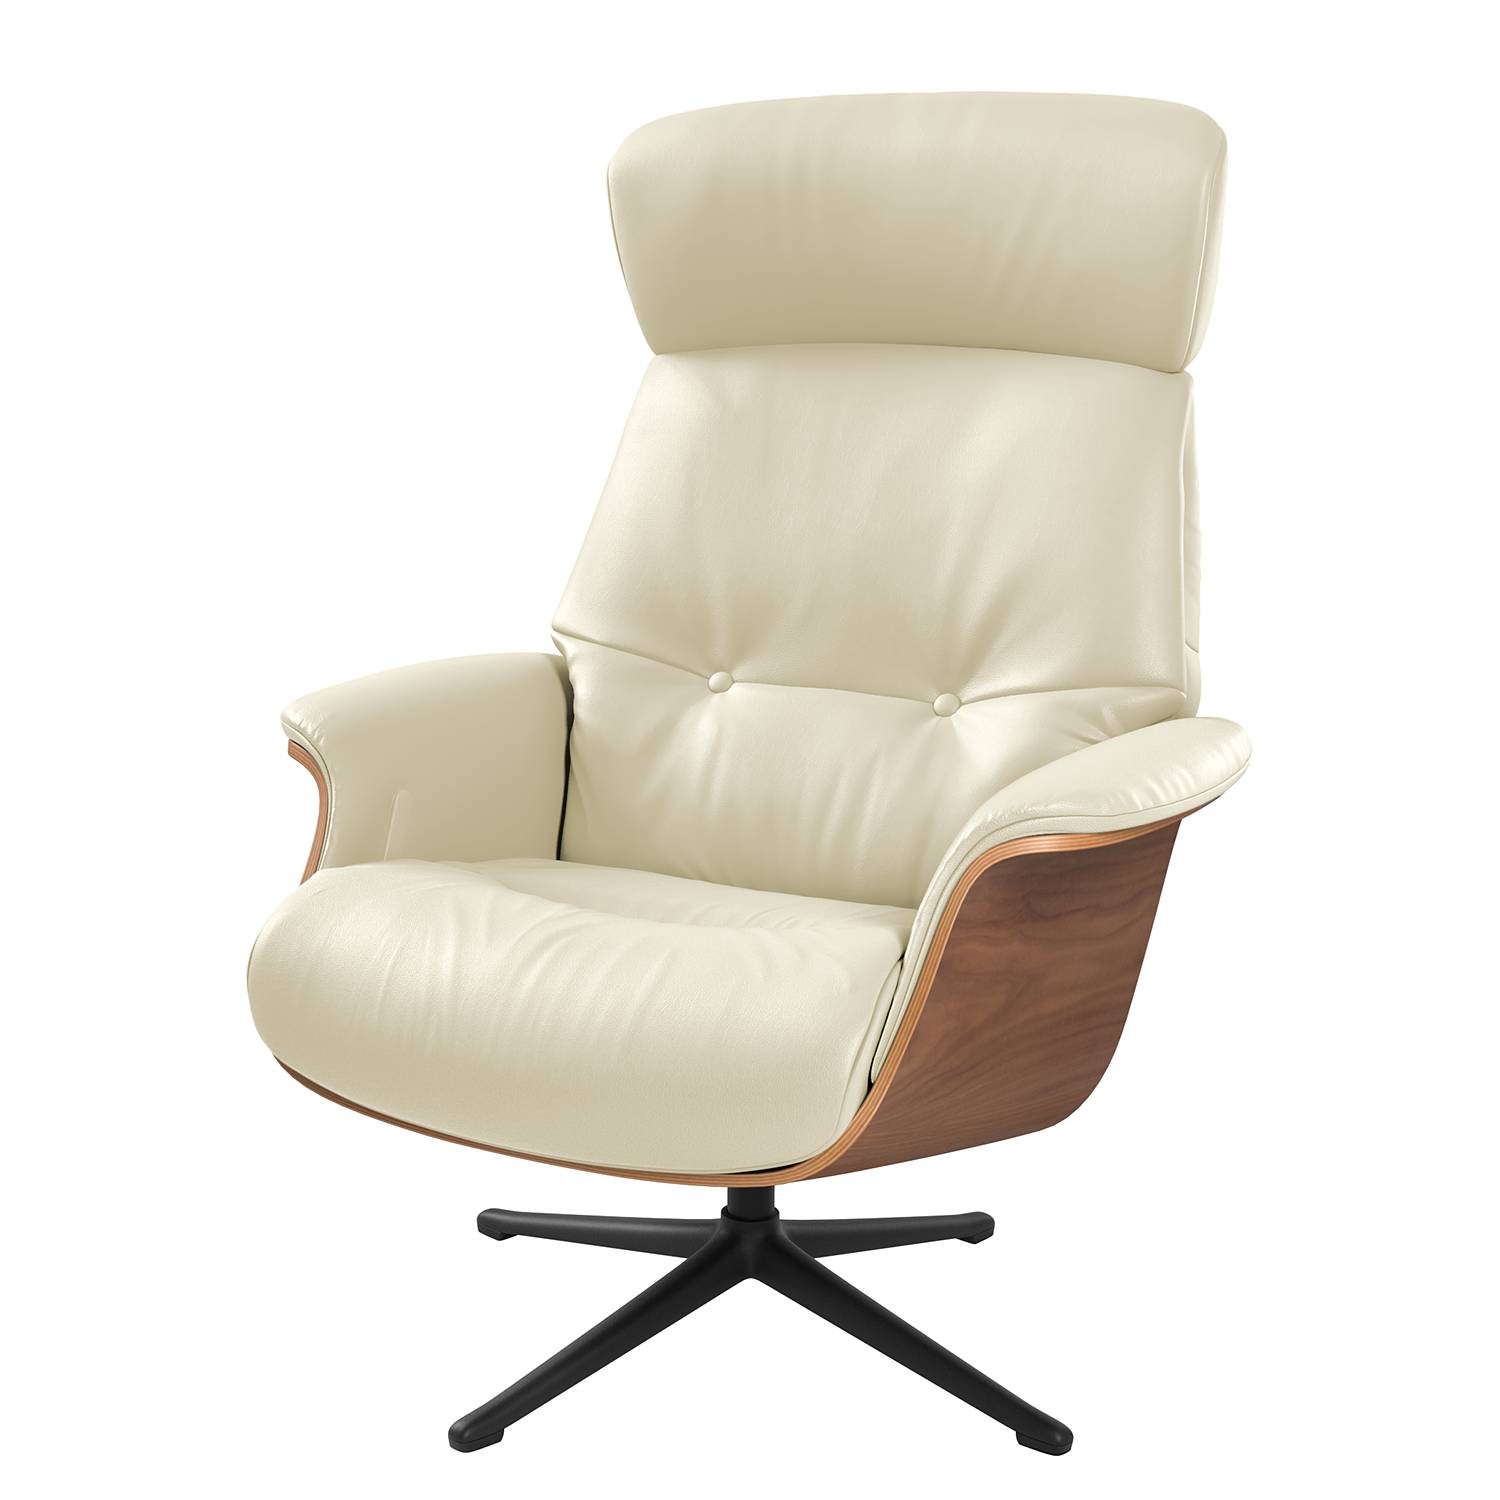 Image of Fauteuil relax Anderson I 000000001000129626